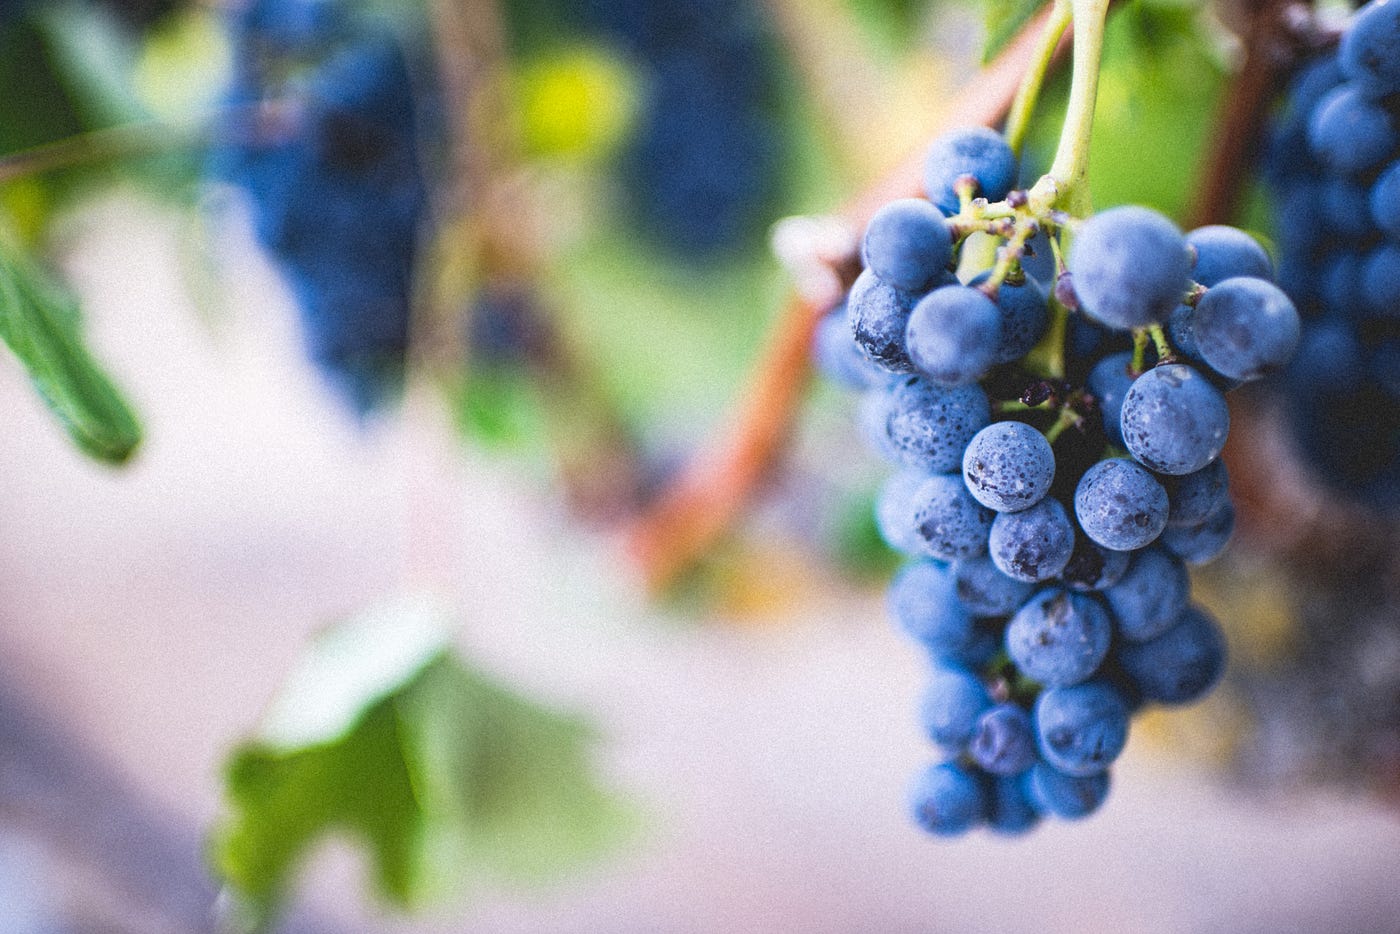 A bunch of grapes hang down on the right side of the image. THe rest of the image is blurred. Subjects consuming healthful plant-based diets (with more foods such as fruits, vegetables, nuts, whole grains, and legumes; reduced intake of refined grains, animal products, and sugary drinks) had a small reduction (one-sixth) in overall mortality. An unhealthy plant-based diet (including higher levels of sugary beverages, sweets, and refined grains) had a 1.2 times increase in premature death.